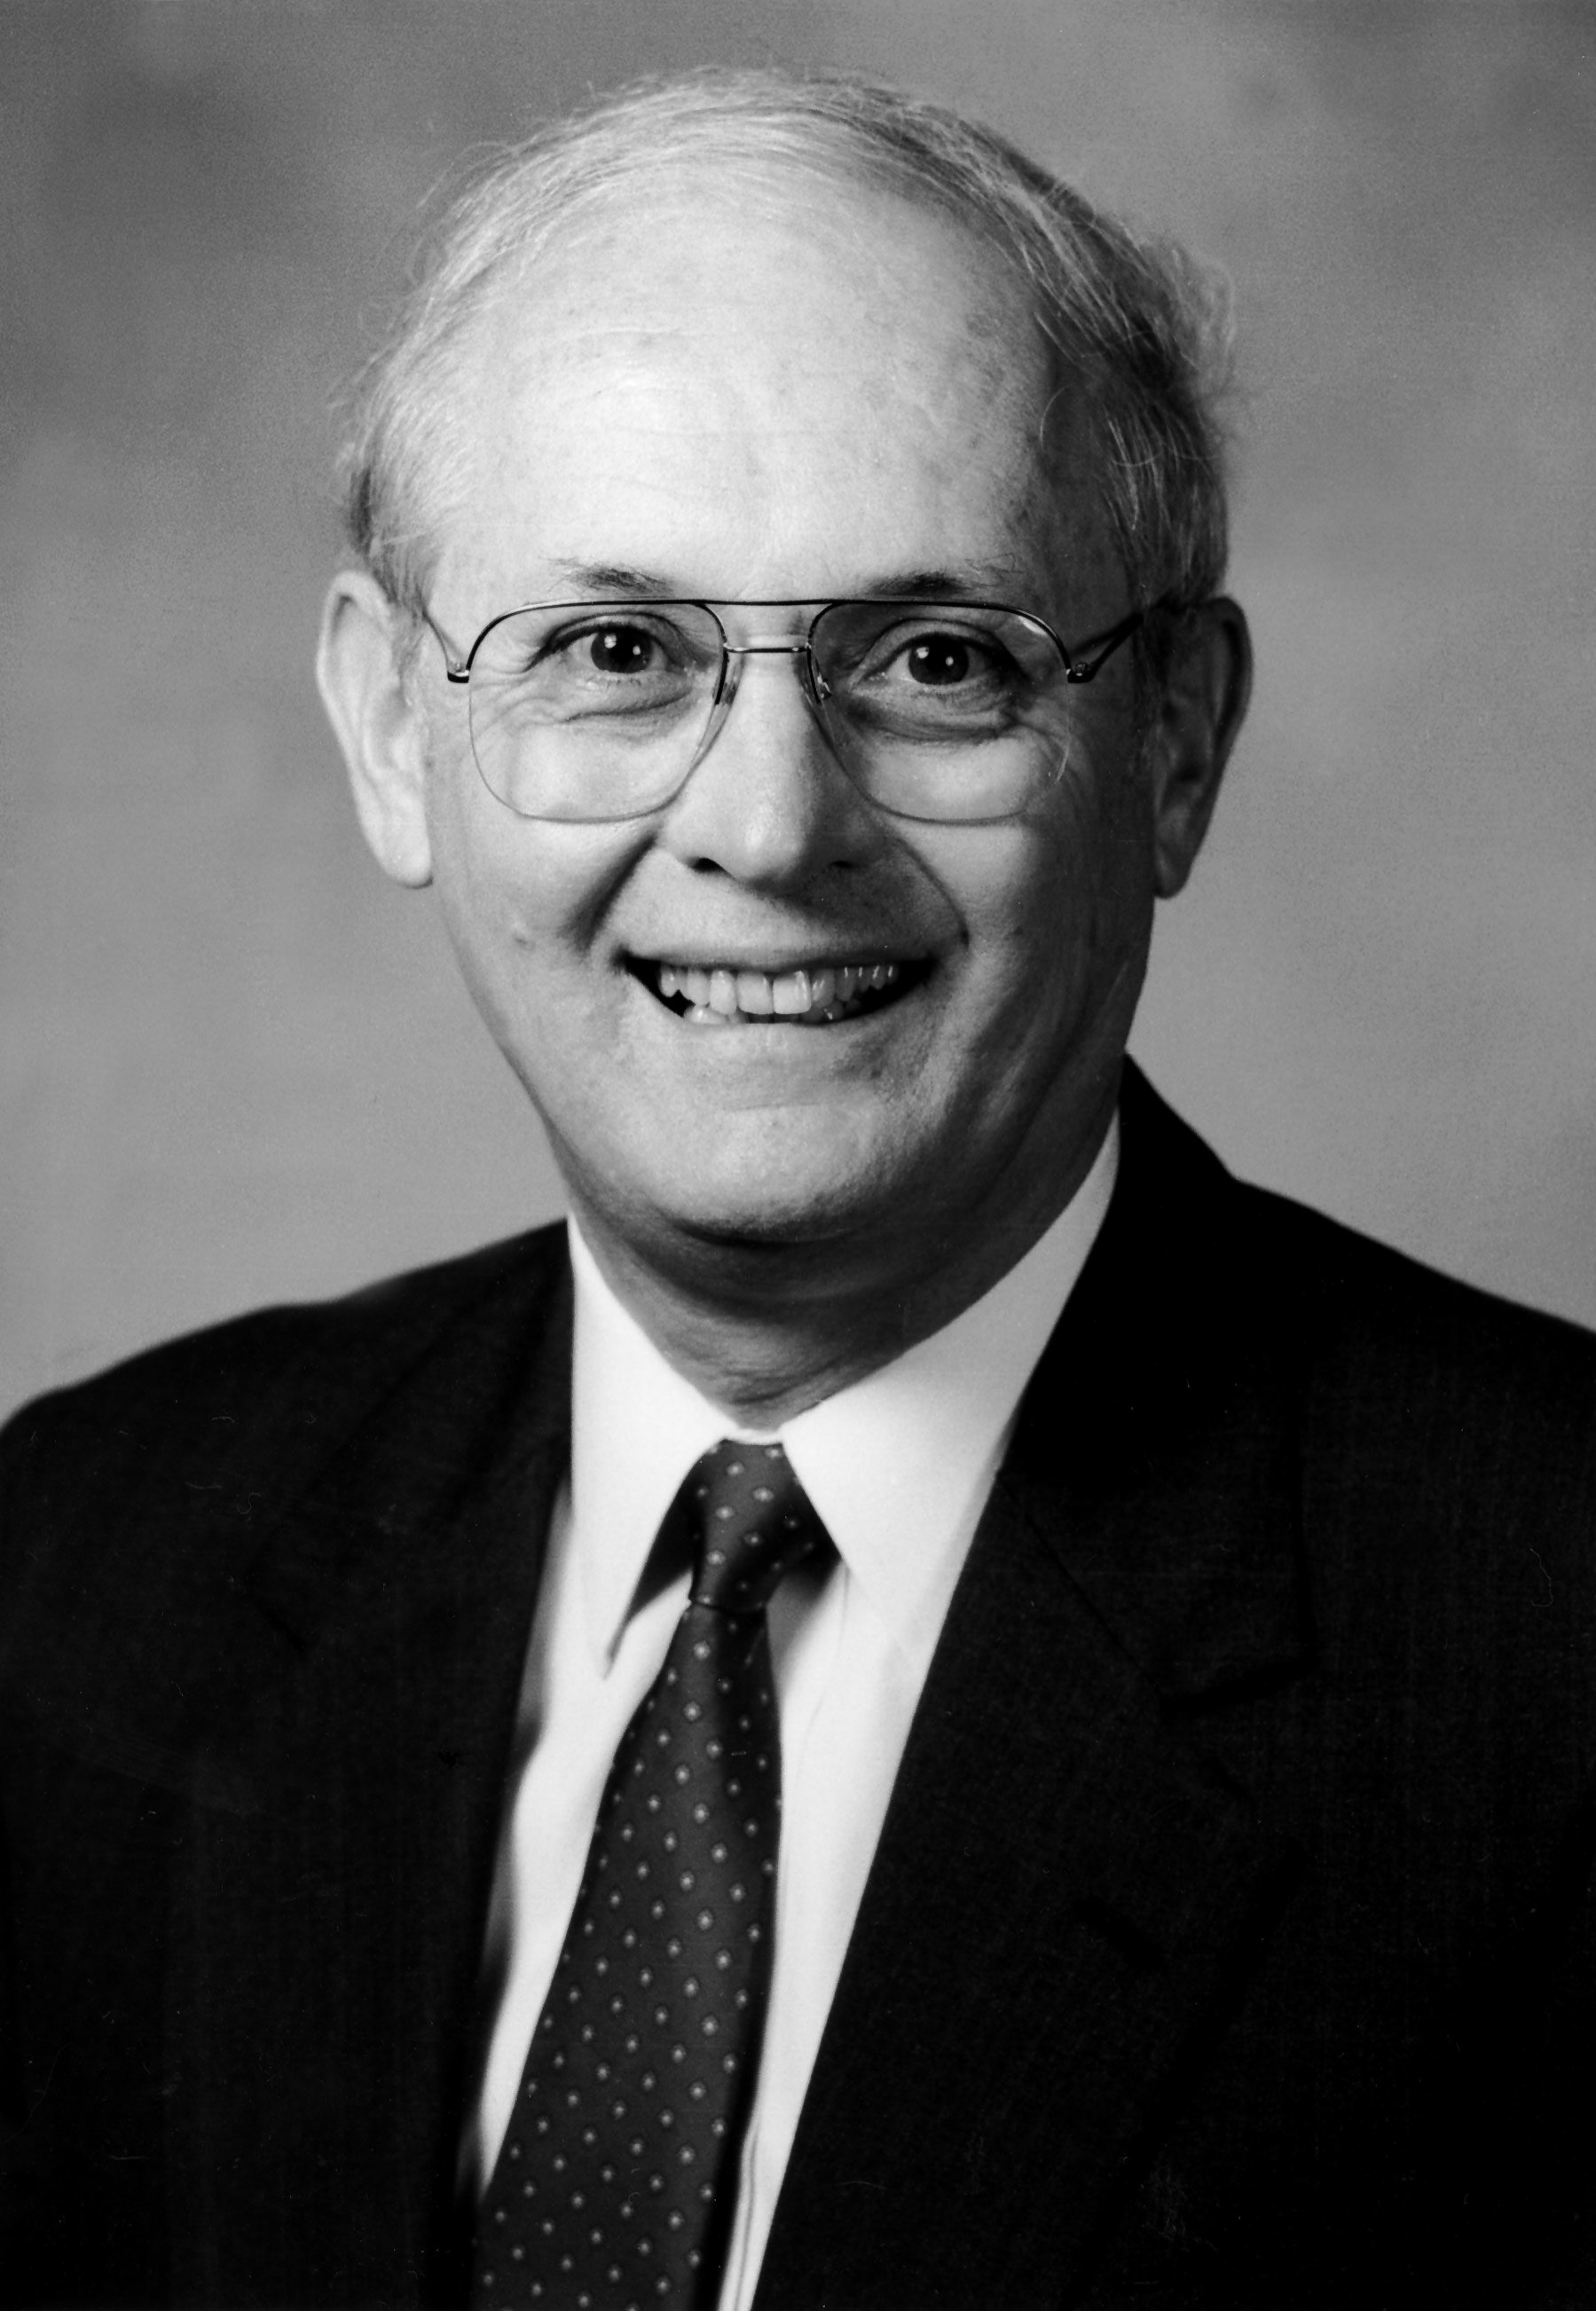 A photo of Roger Dierberg wearing glasses and a suit jacket and tie, smiling for the camera.